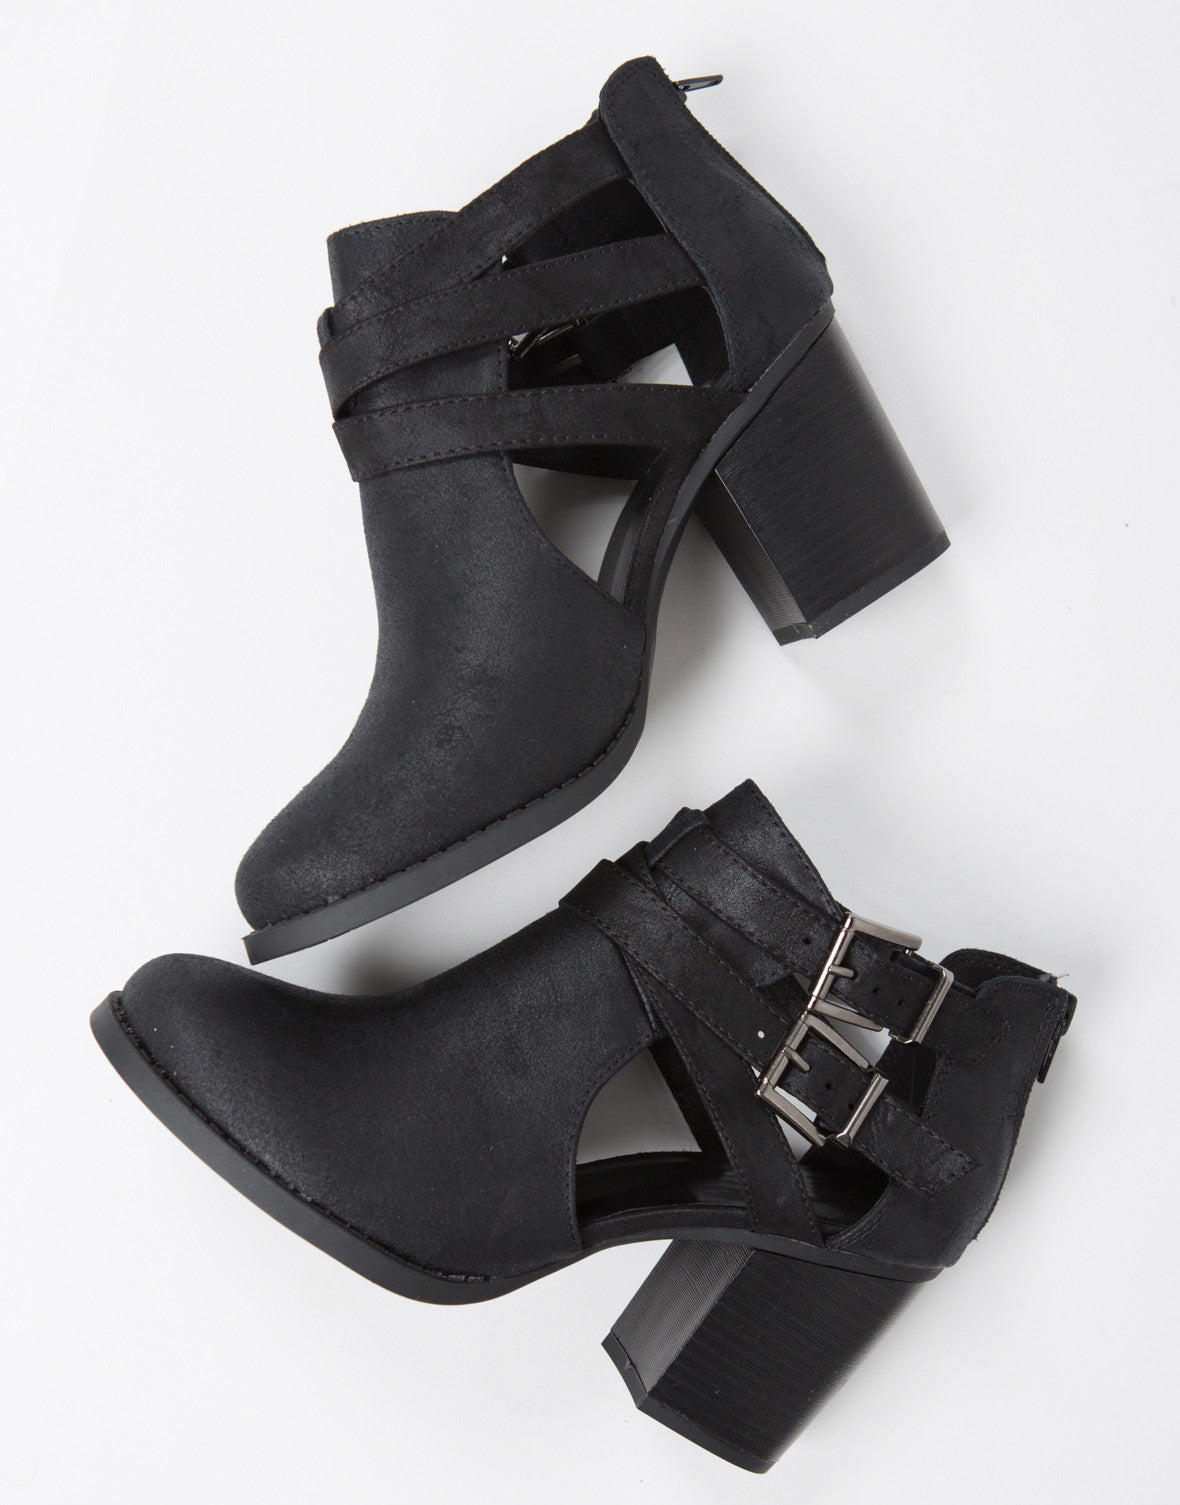 cut out black booties